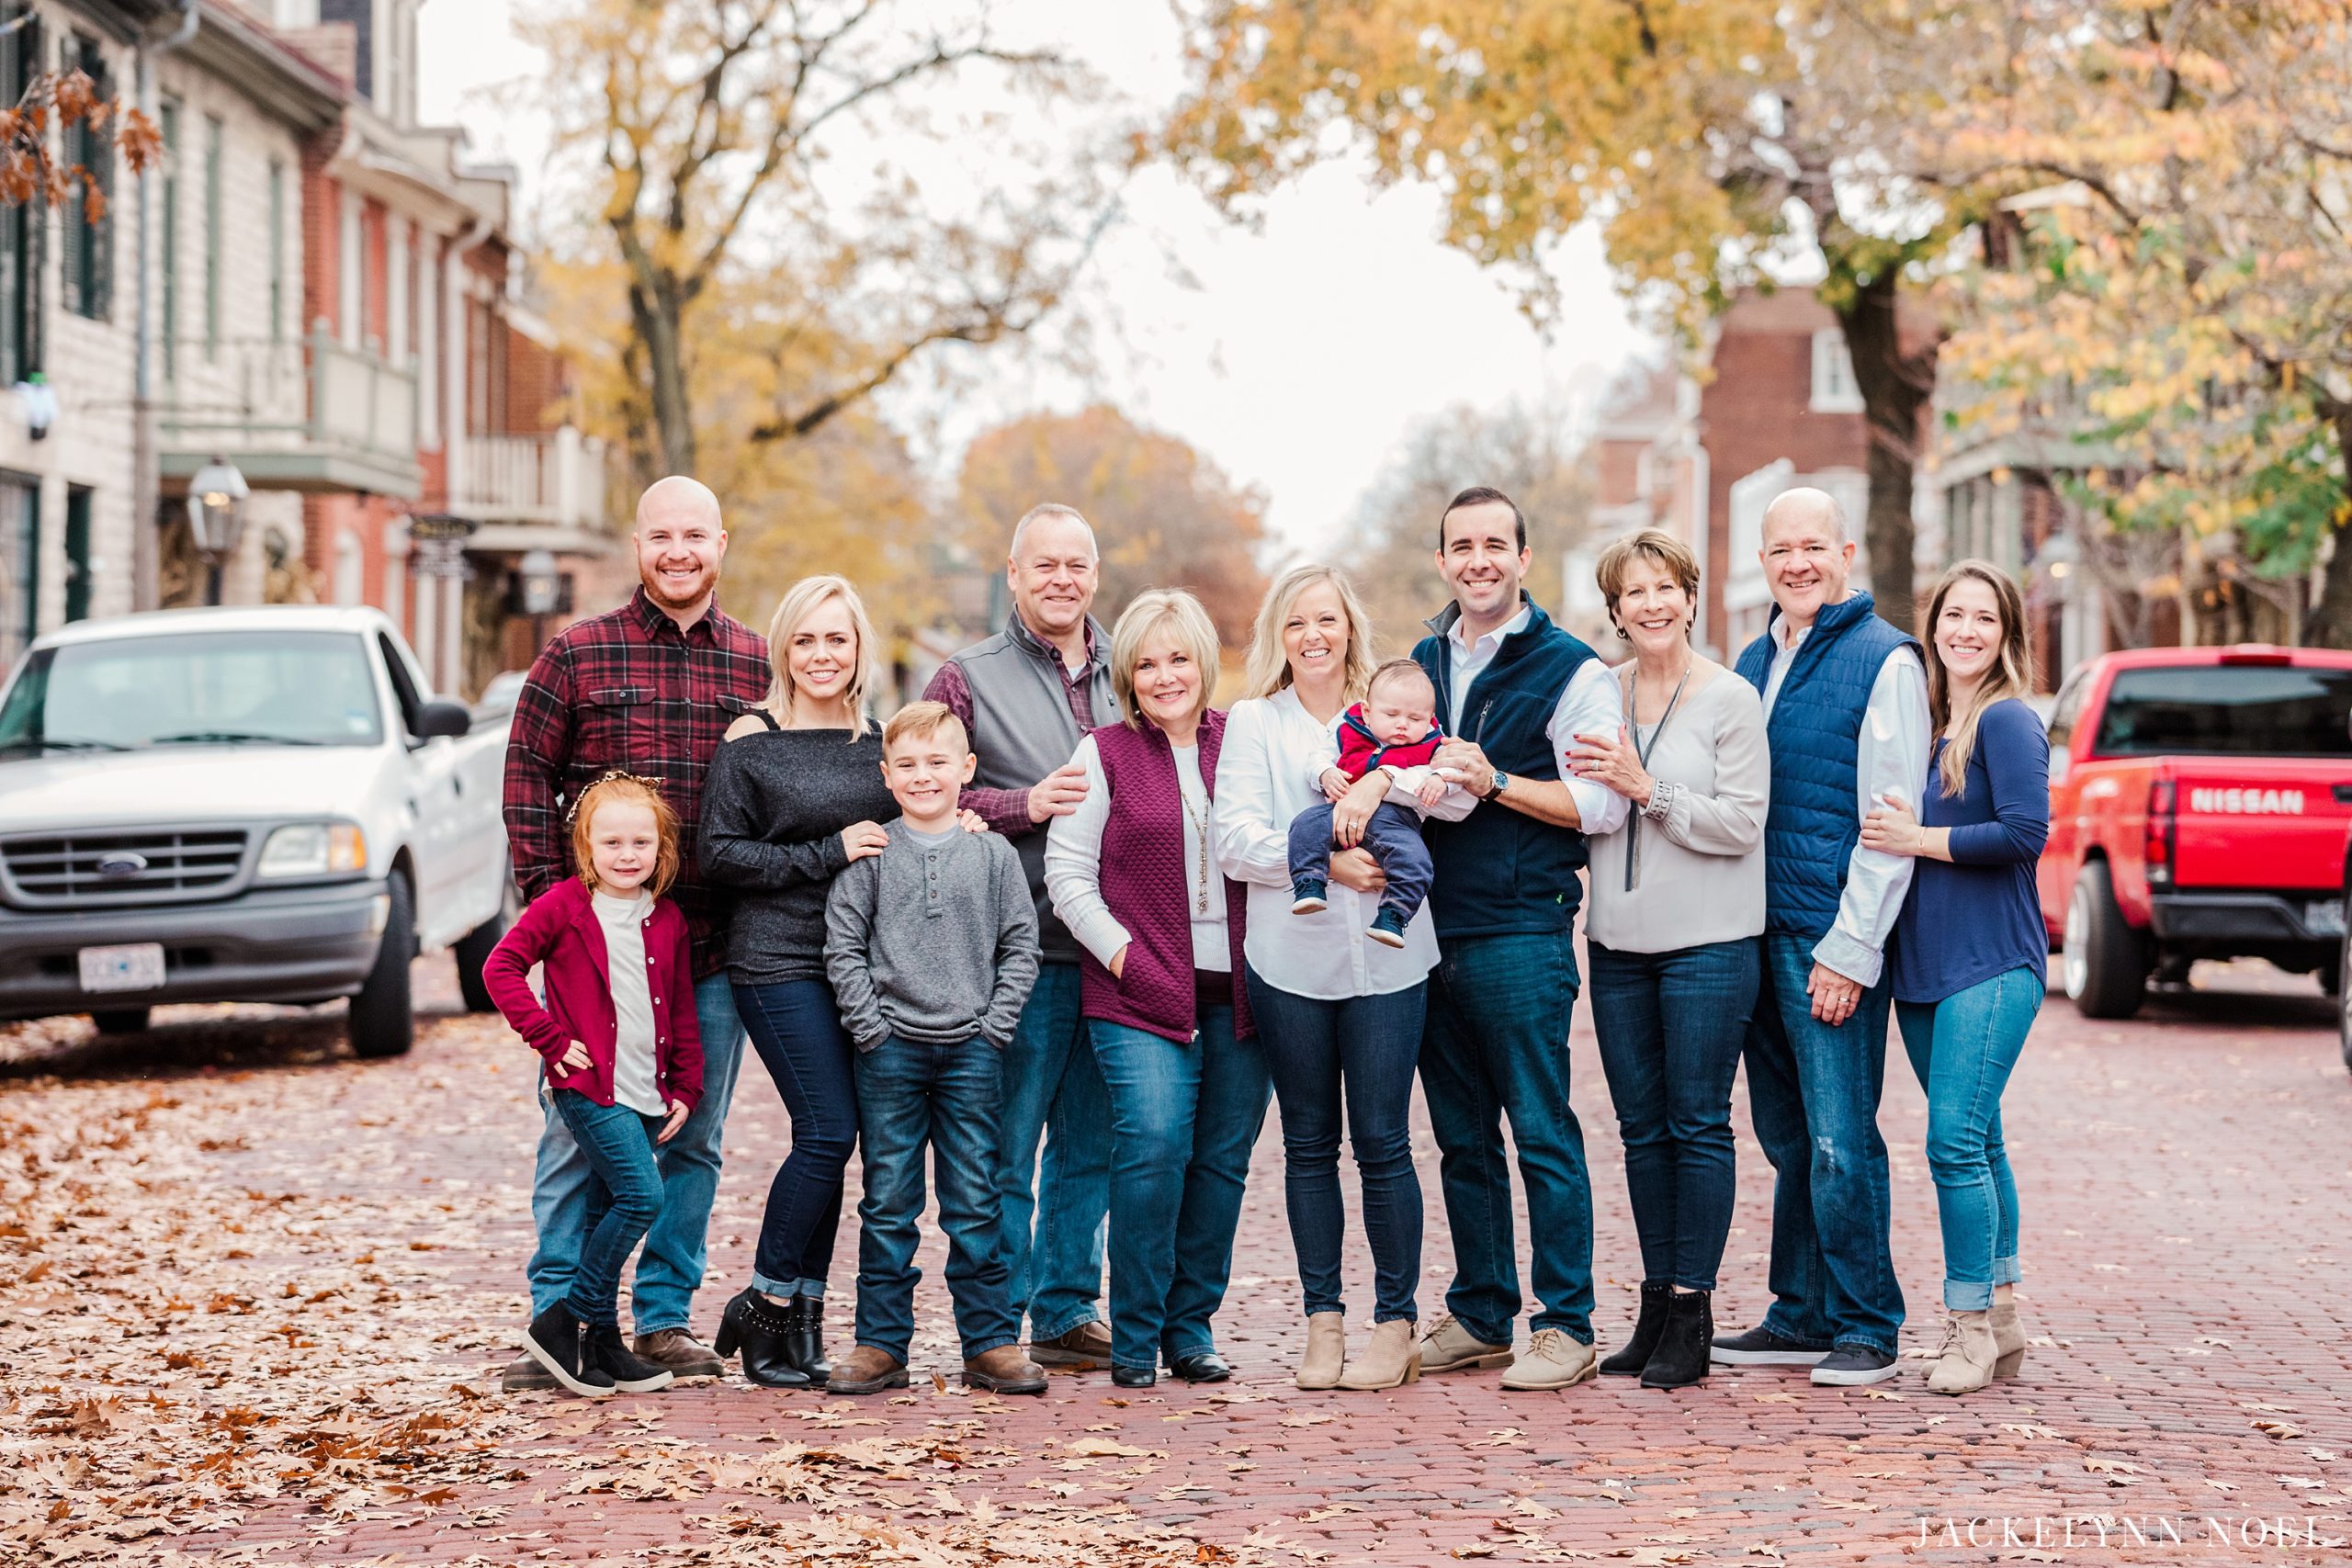 Big family photos on Main Street in St. Charles, MO by Jackelynn Noel Photography